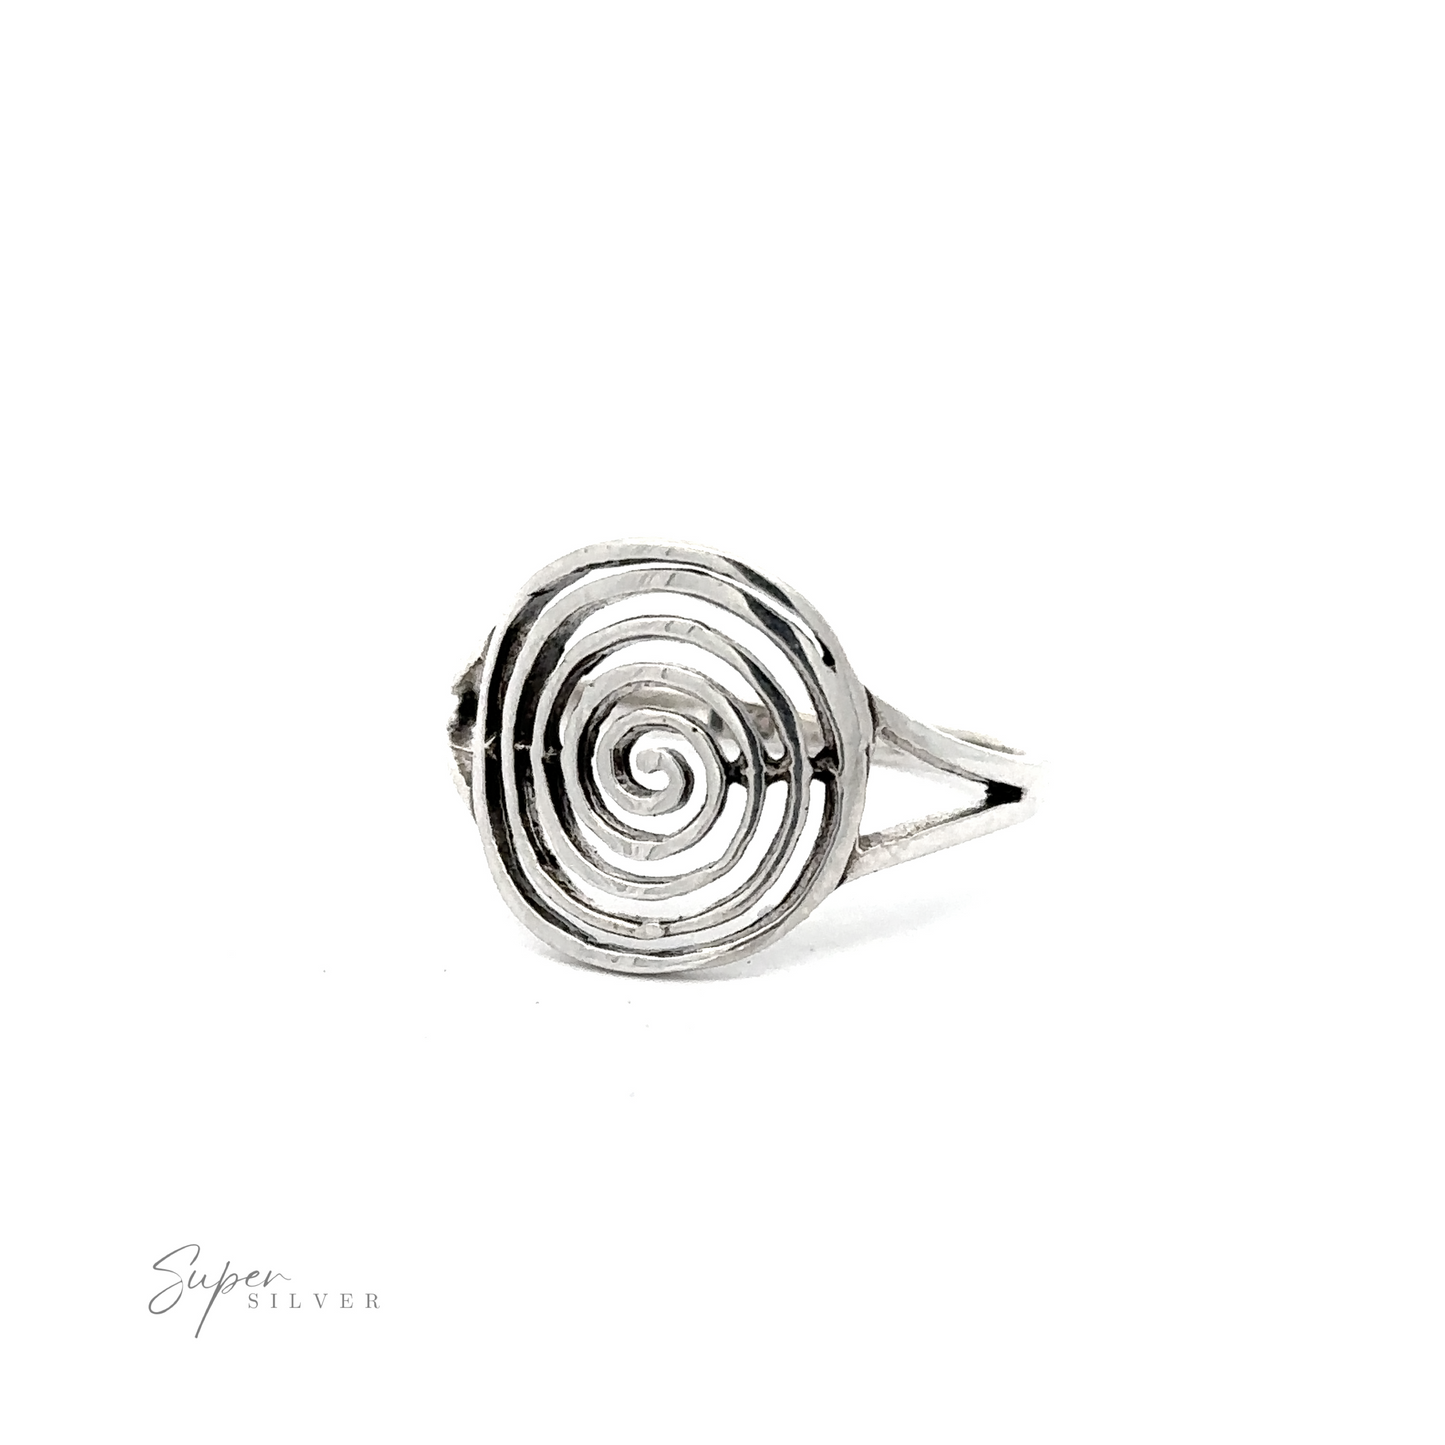 Silver Oxidized Spiral Design Fashion Ring Jewelry For Girls Women Men's